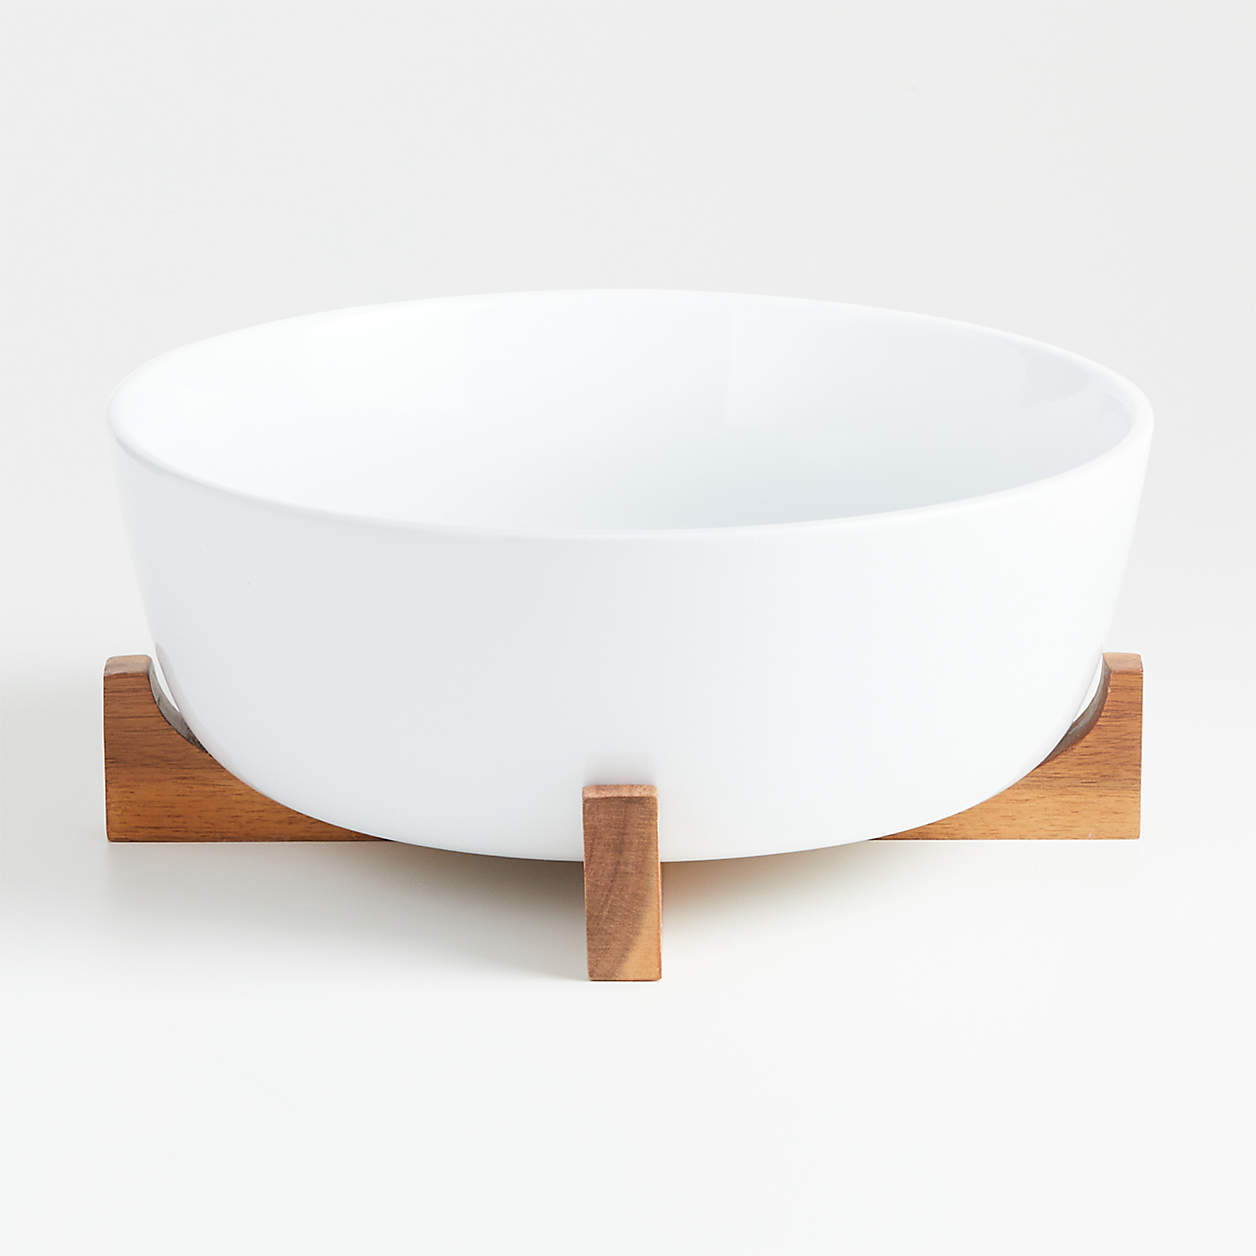 Oven to Table Large Serving Bowl with Wood Stand